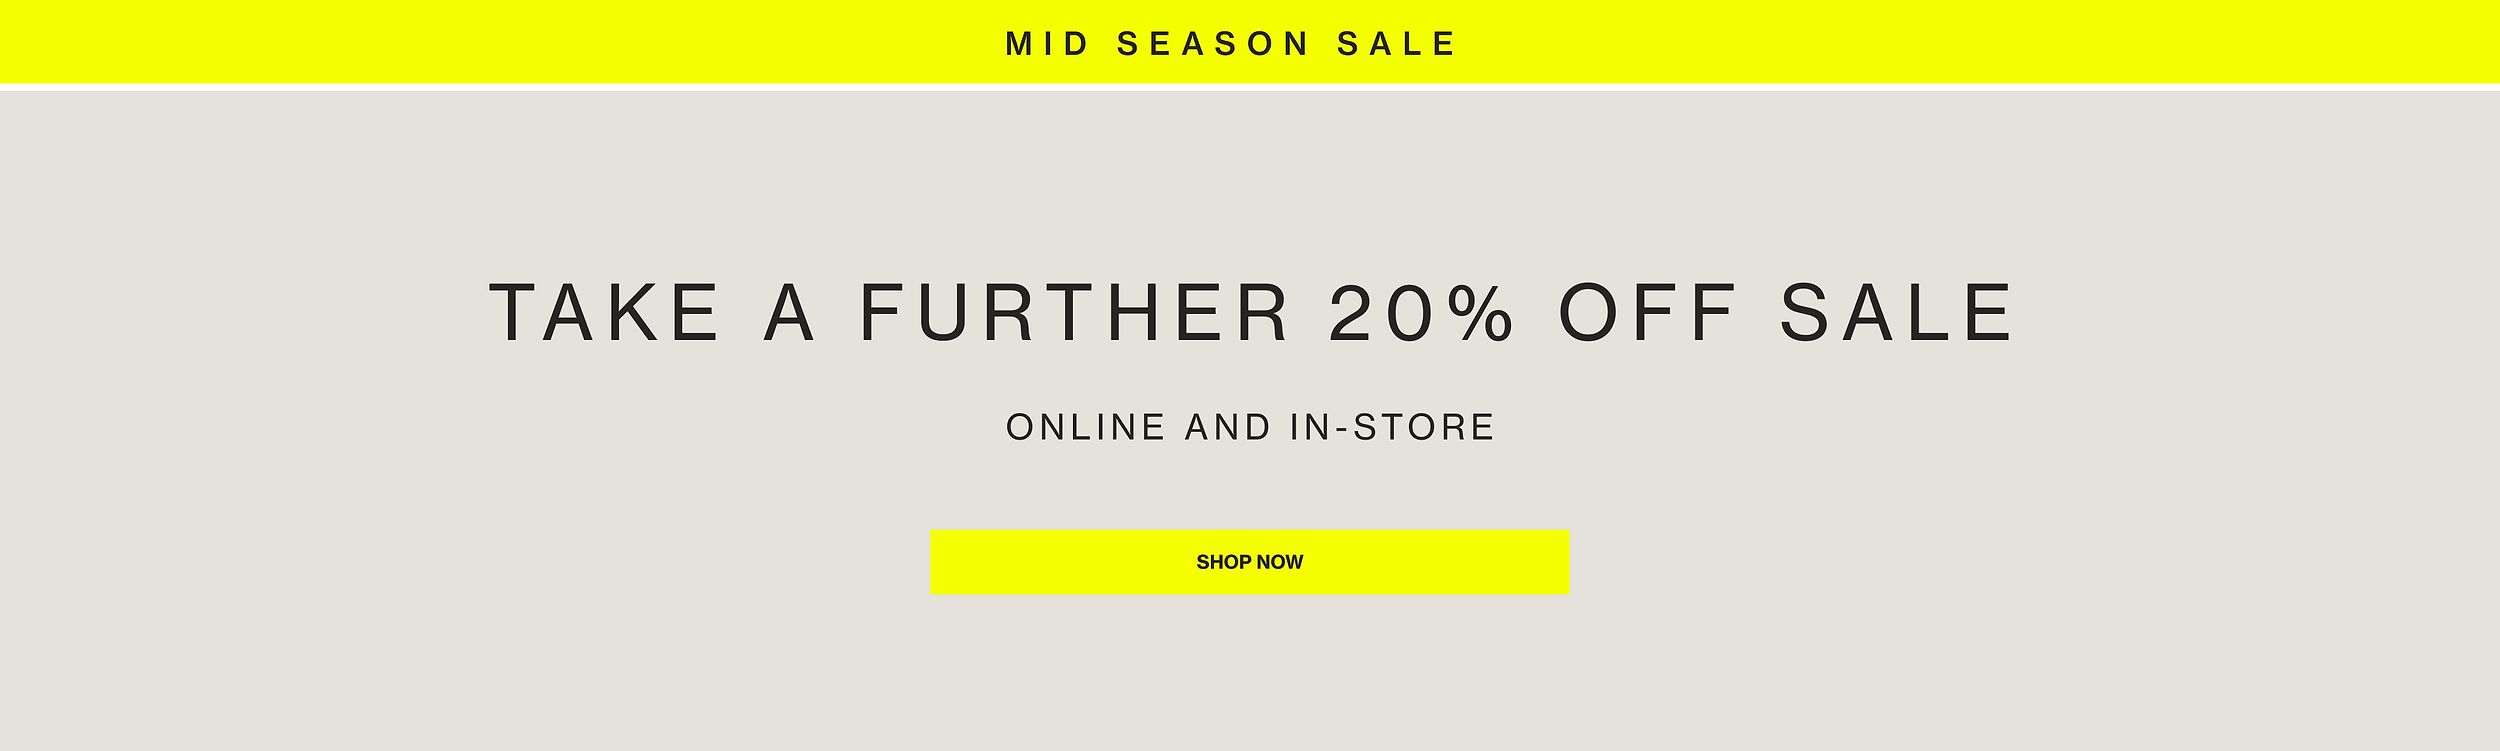 Take a further 20% off sale